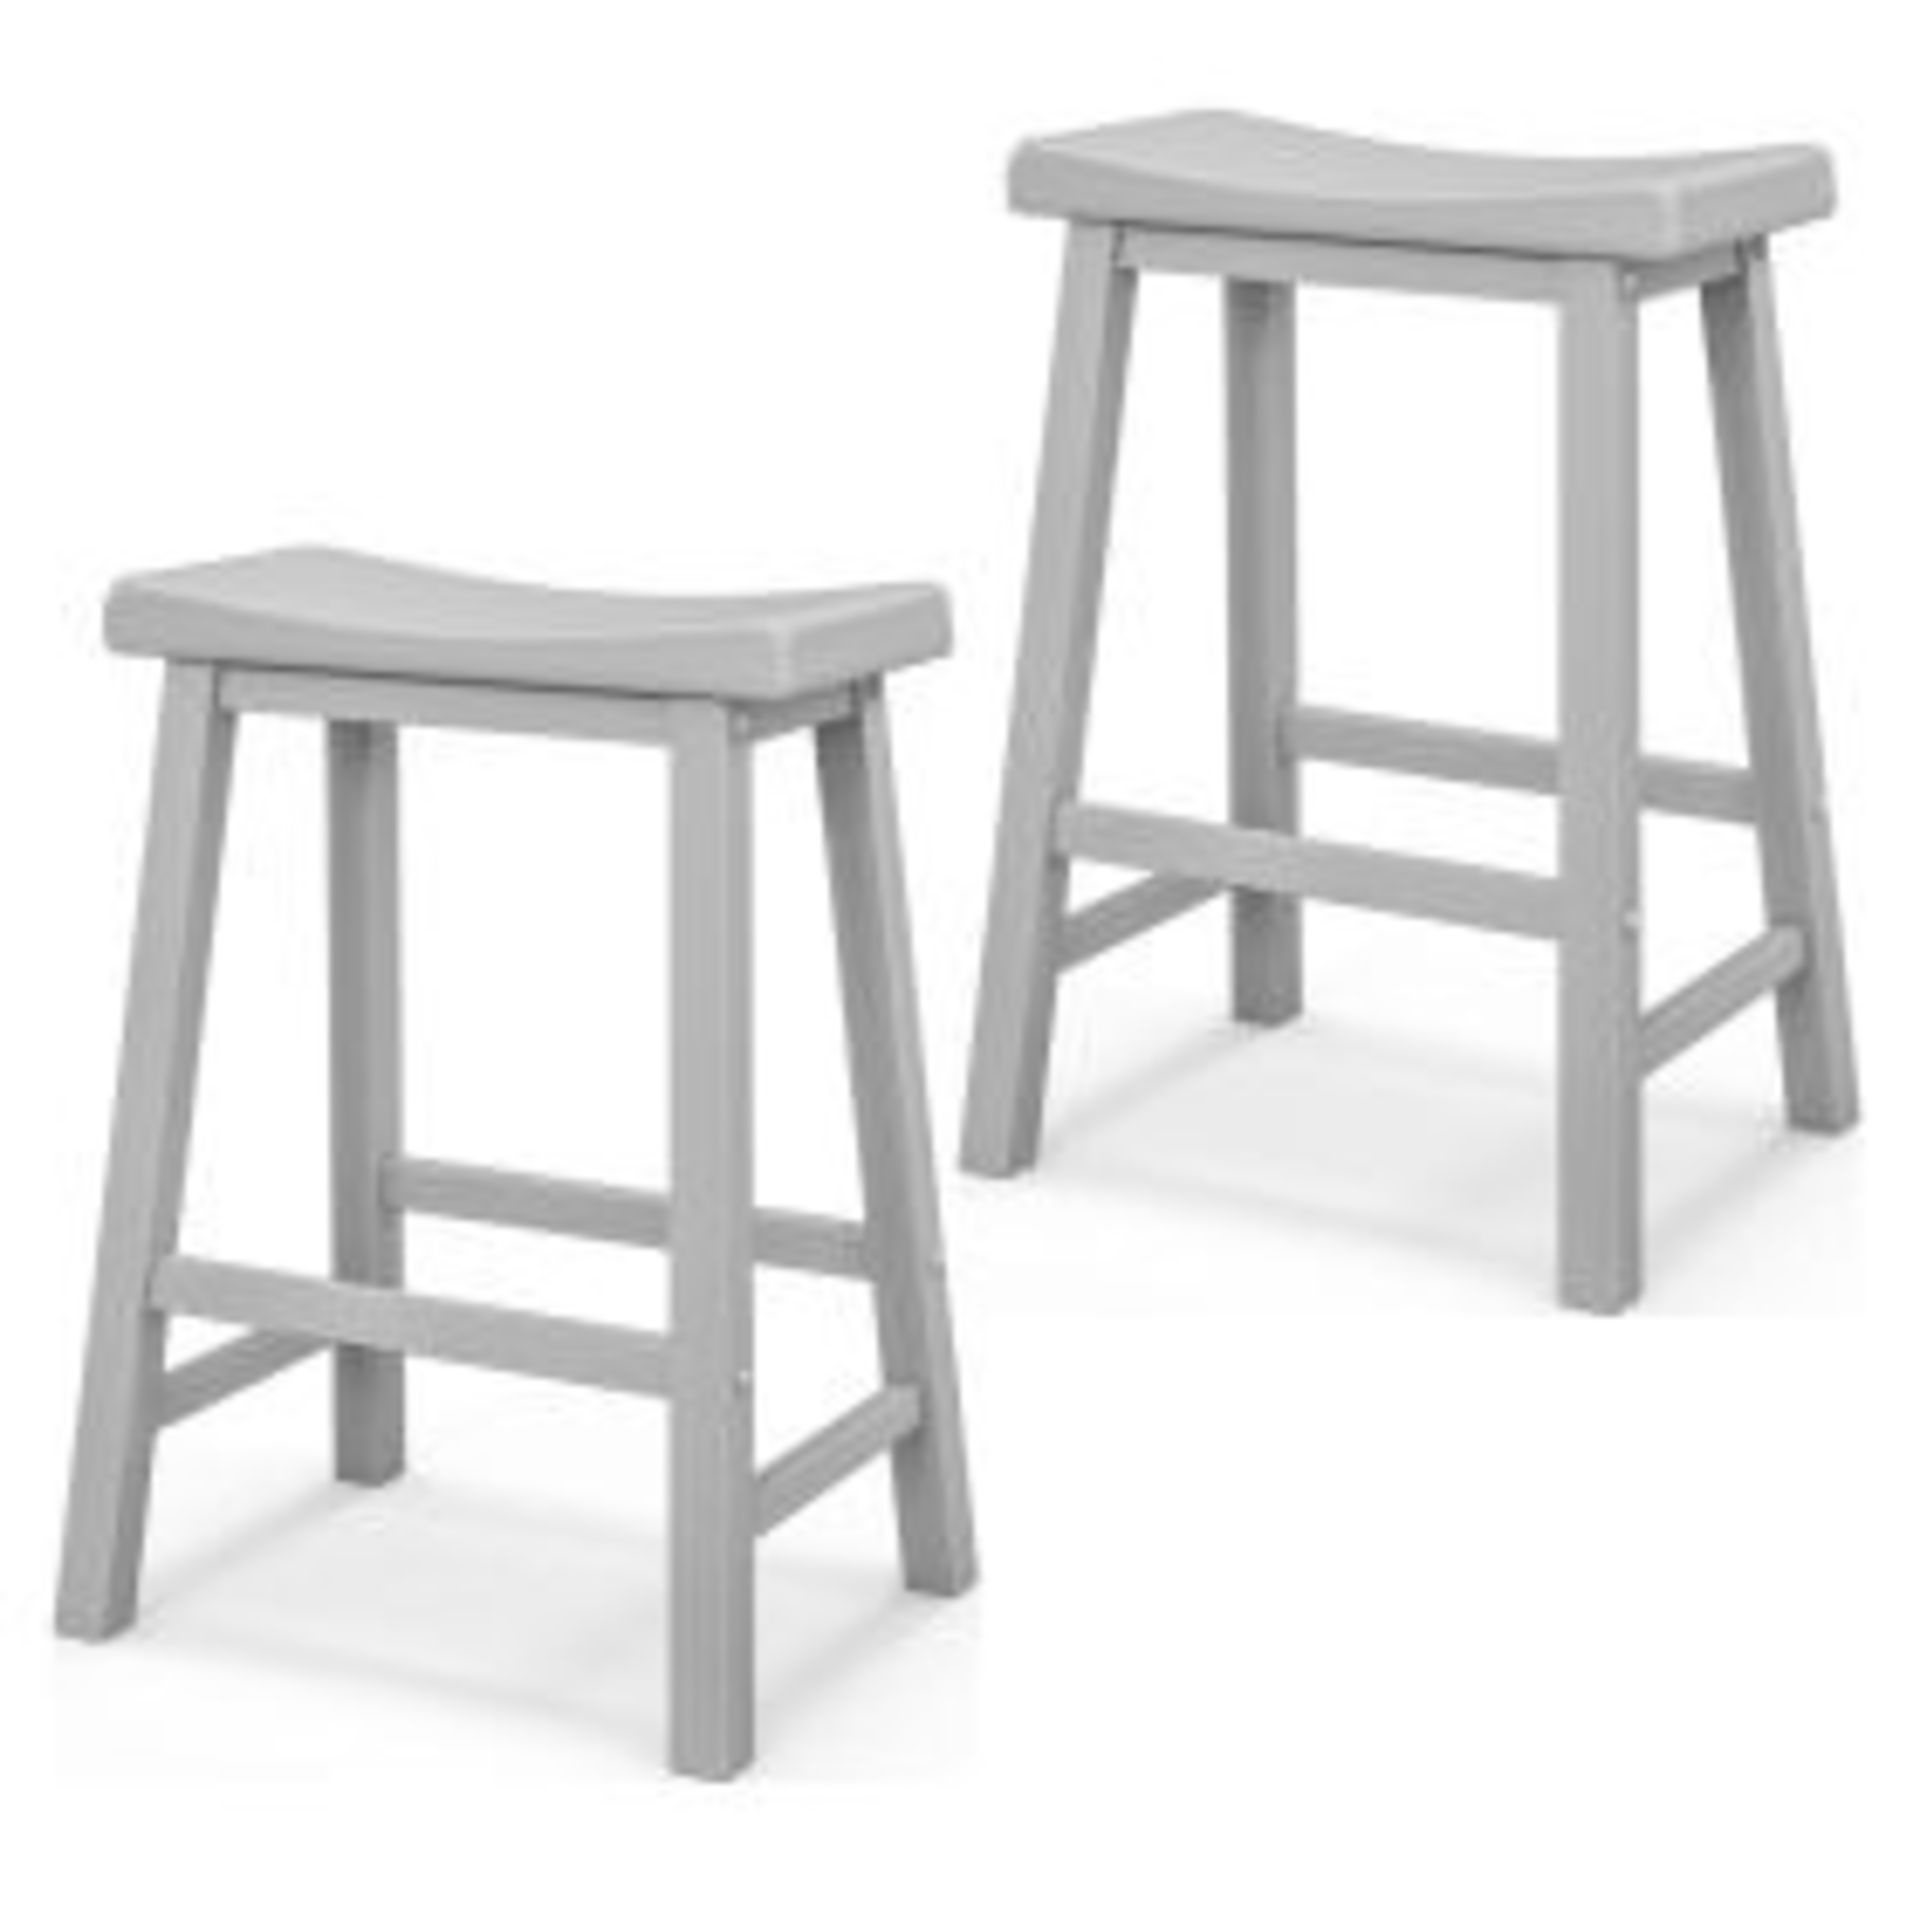 64.5cm Counter Height Bar Stool with Wooden Seat-Black - ER54